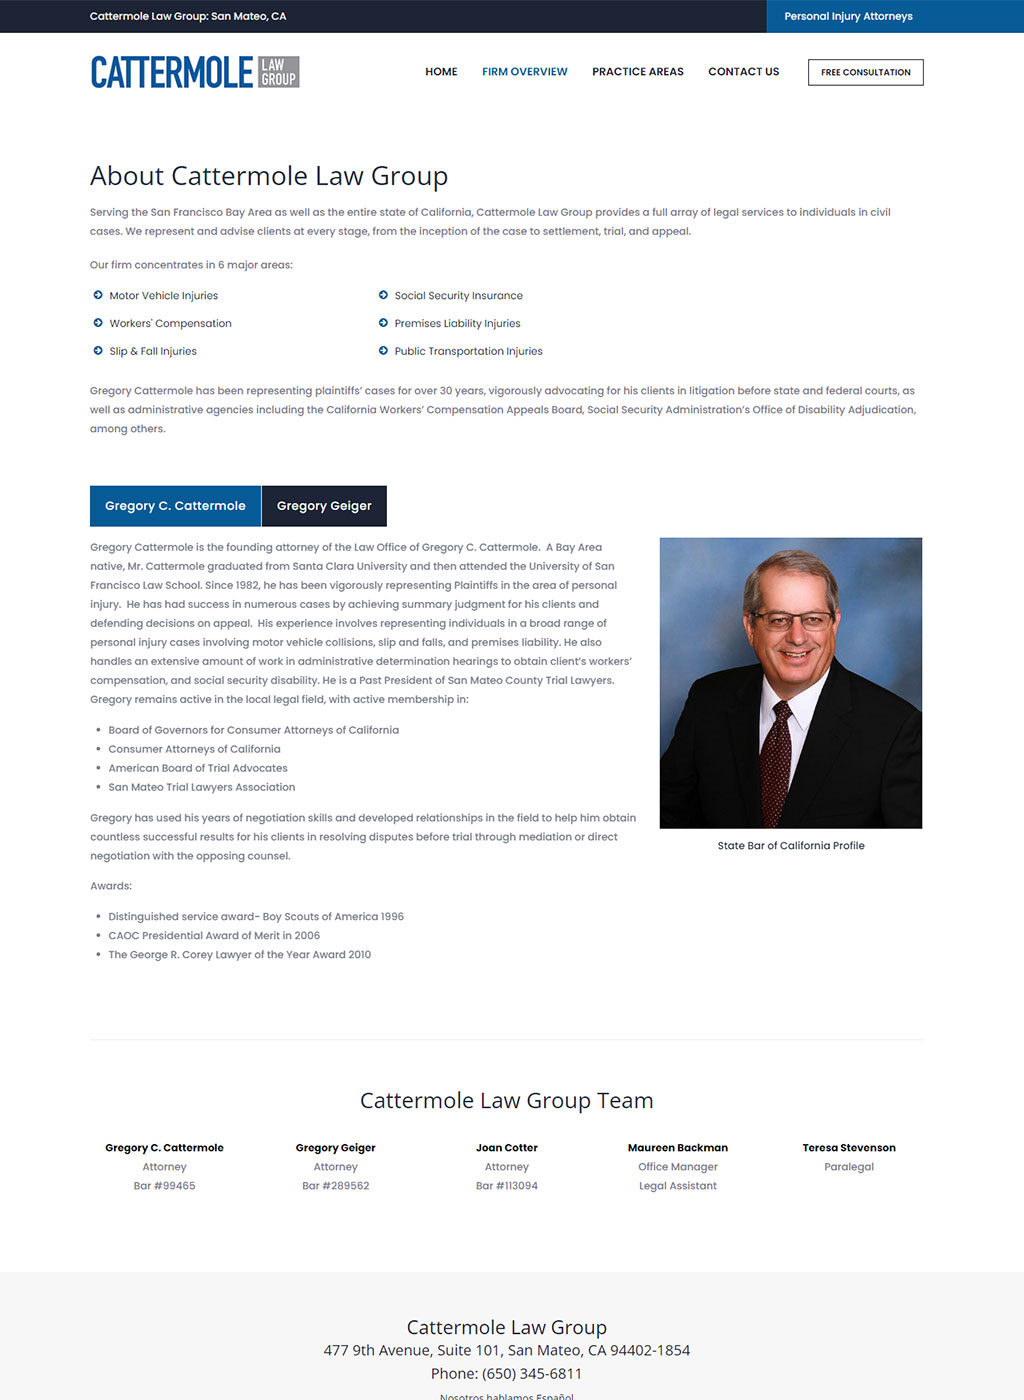 Web development for Cattermole Law Group